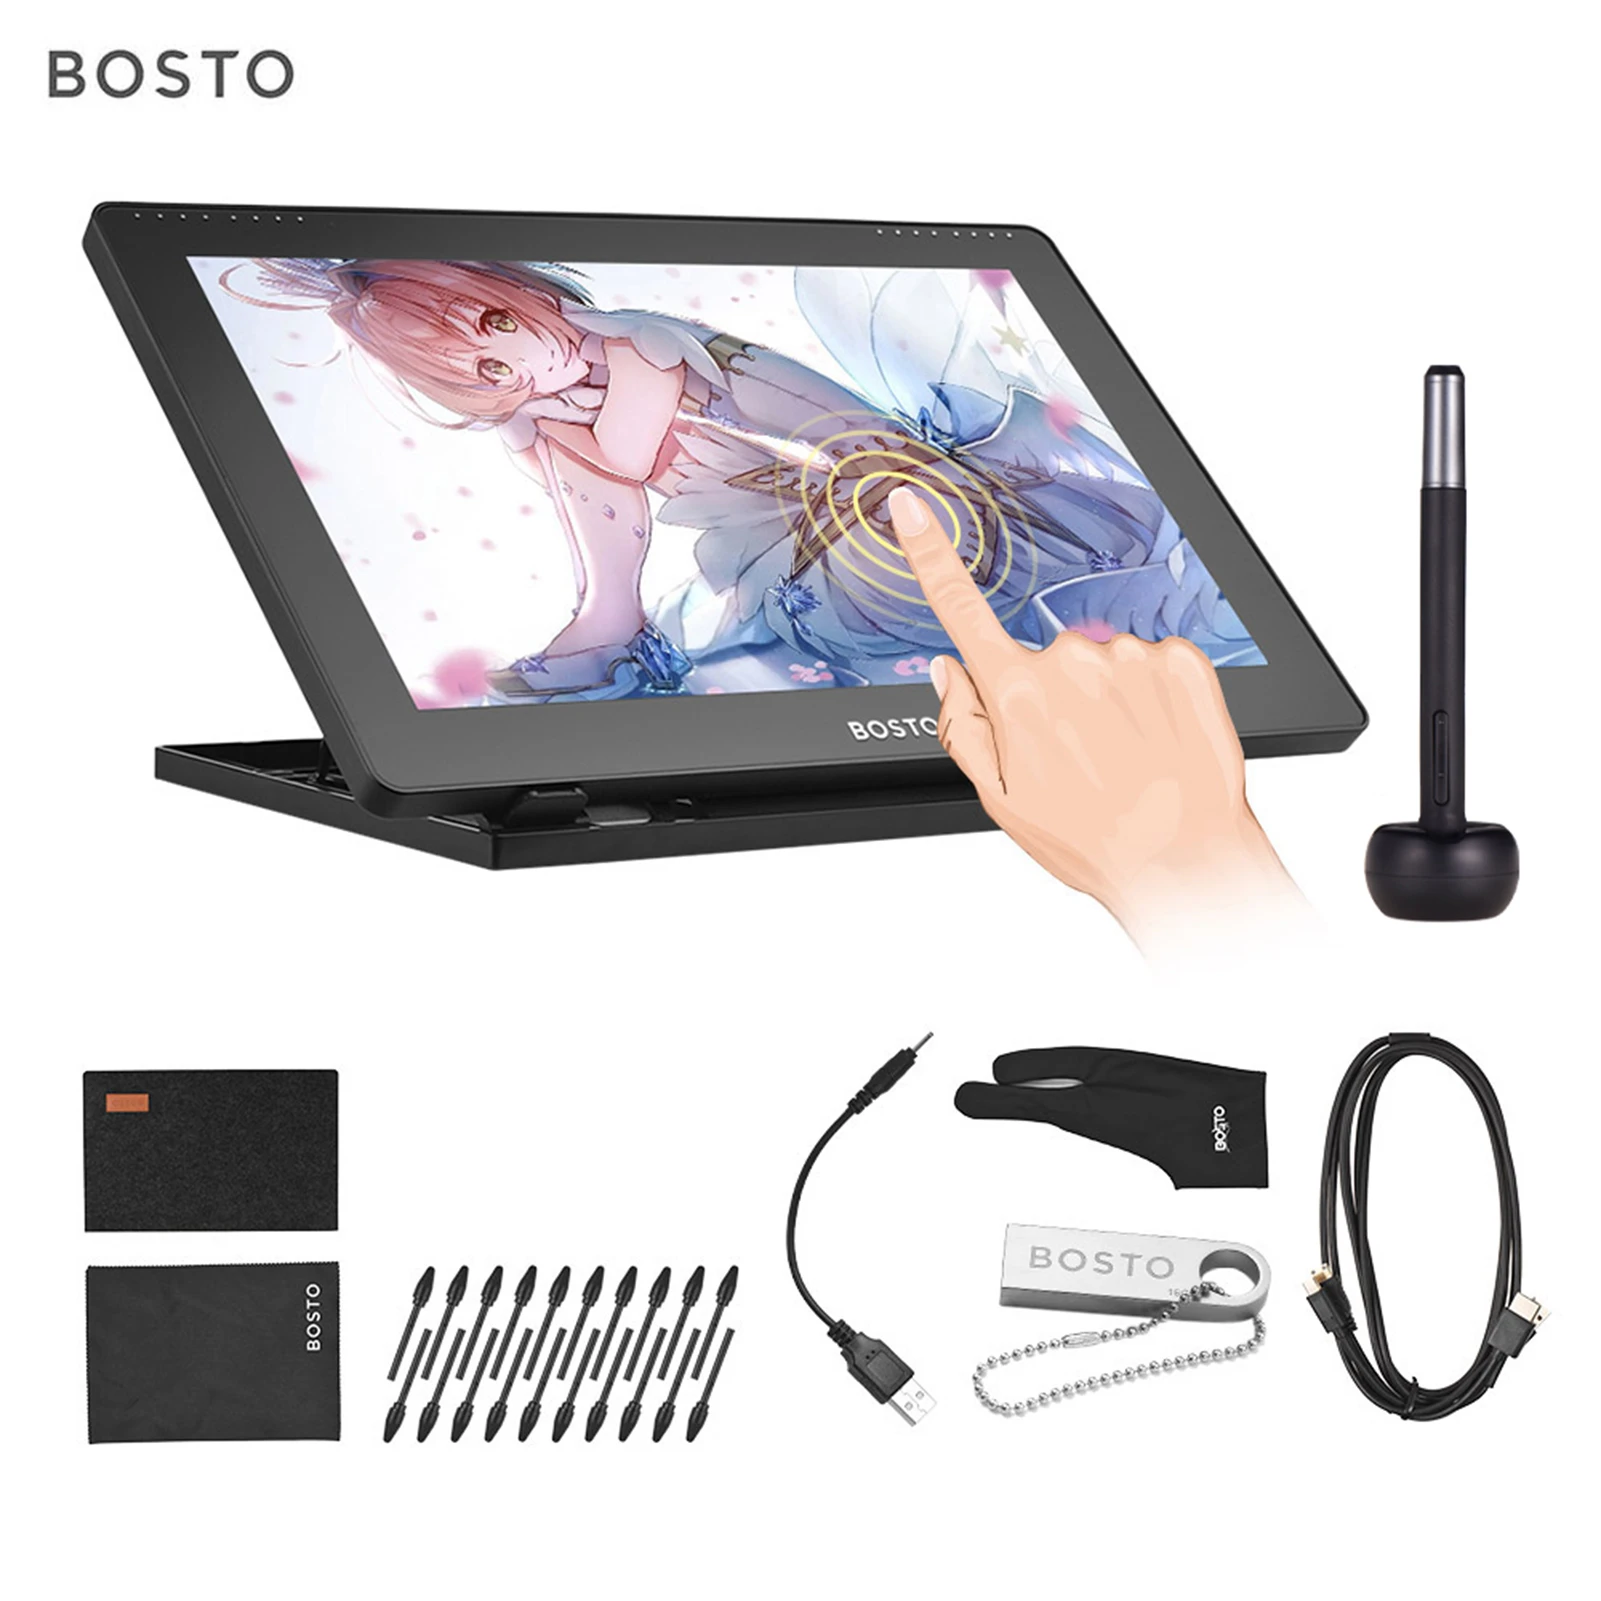 BOSTO 16HD IPS HD Graphics Drawing Digital Tablet Monitor Pen Display with 8 Shortcut Keys & 8192 levels Rechargeable Stylus Pen